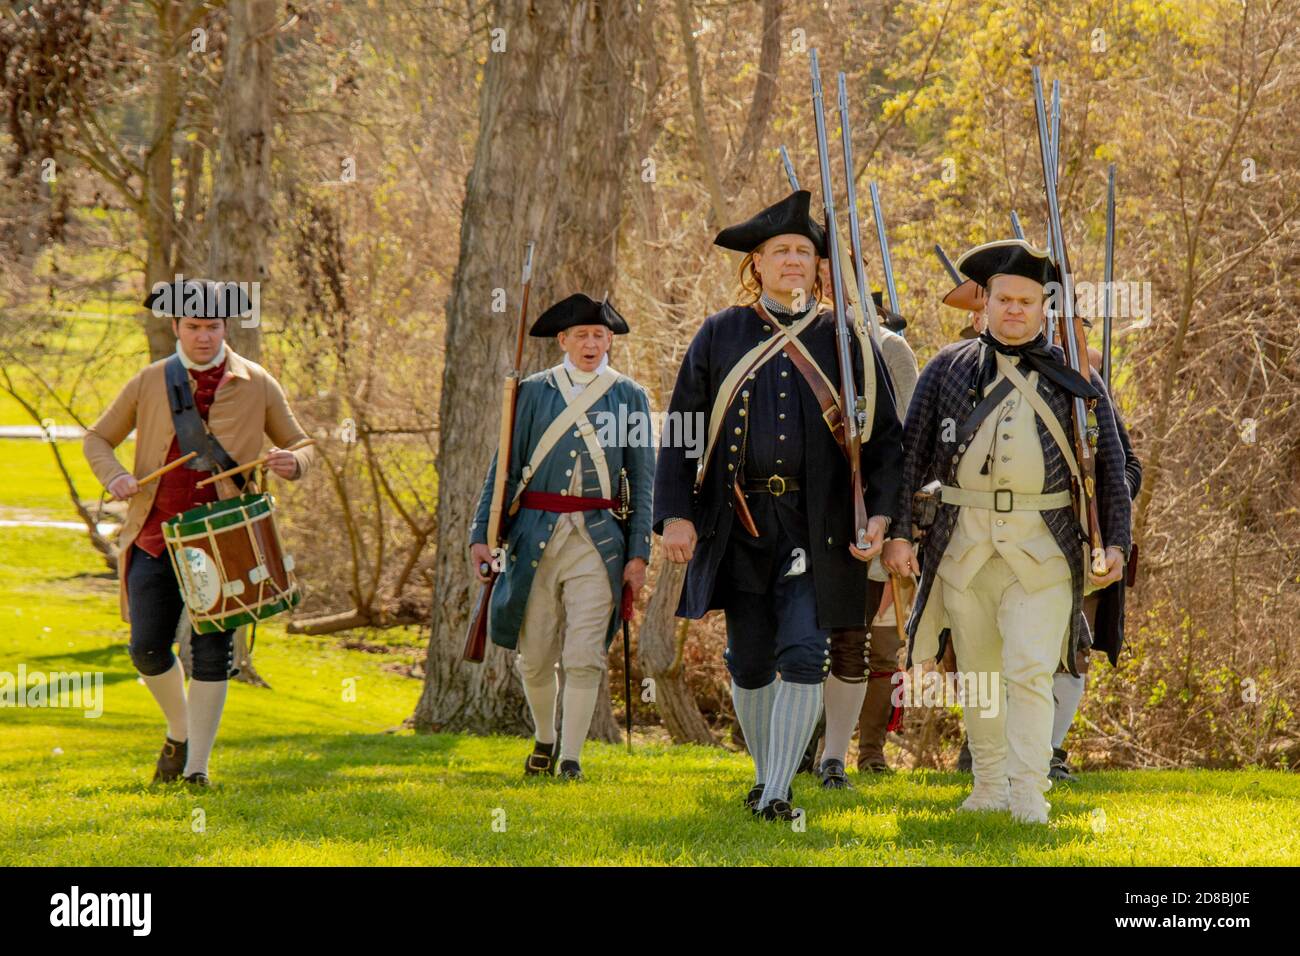 A drummer accompanies rebel soldiers portrayed by actors march to battle at a historical reenactment of an American Revolutionary War battle in a Hunt Stock Photo